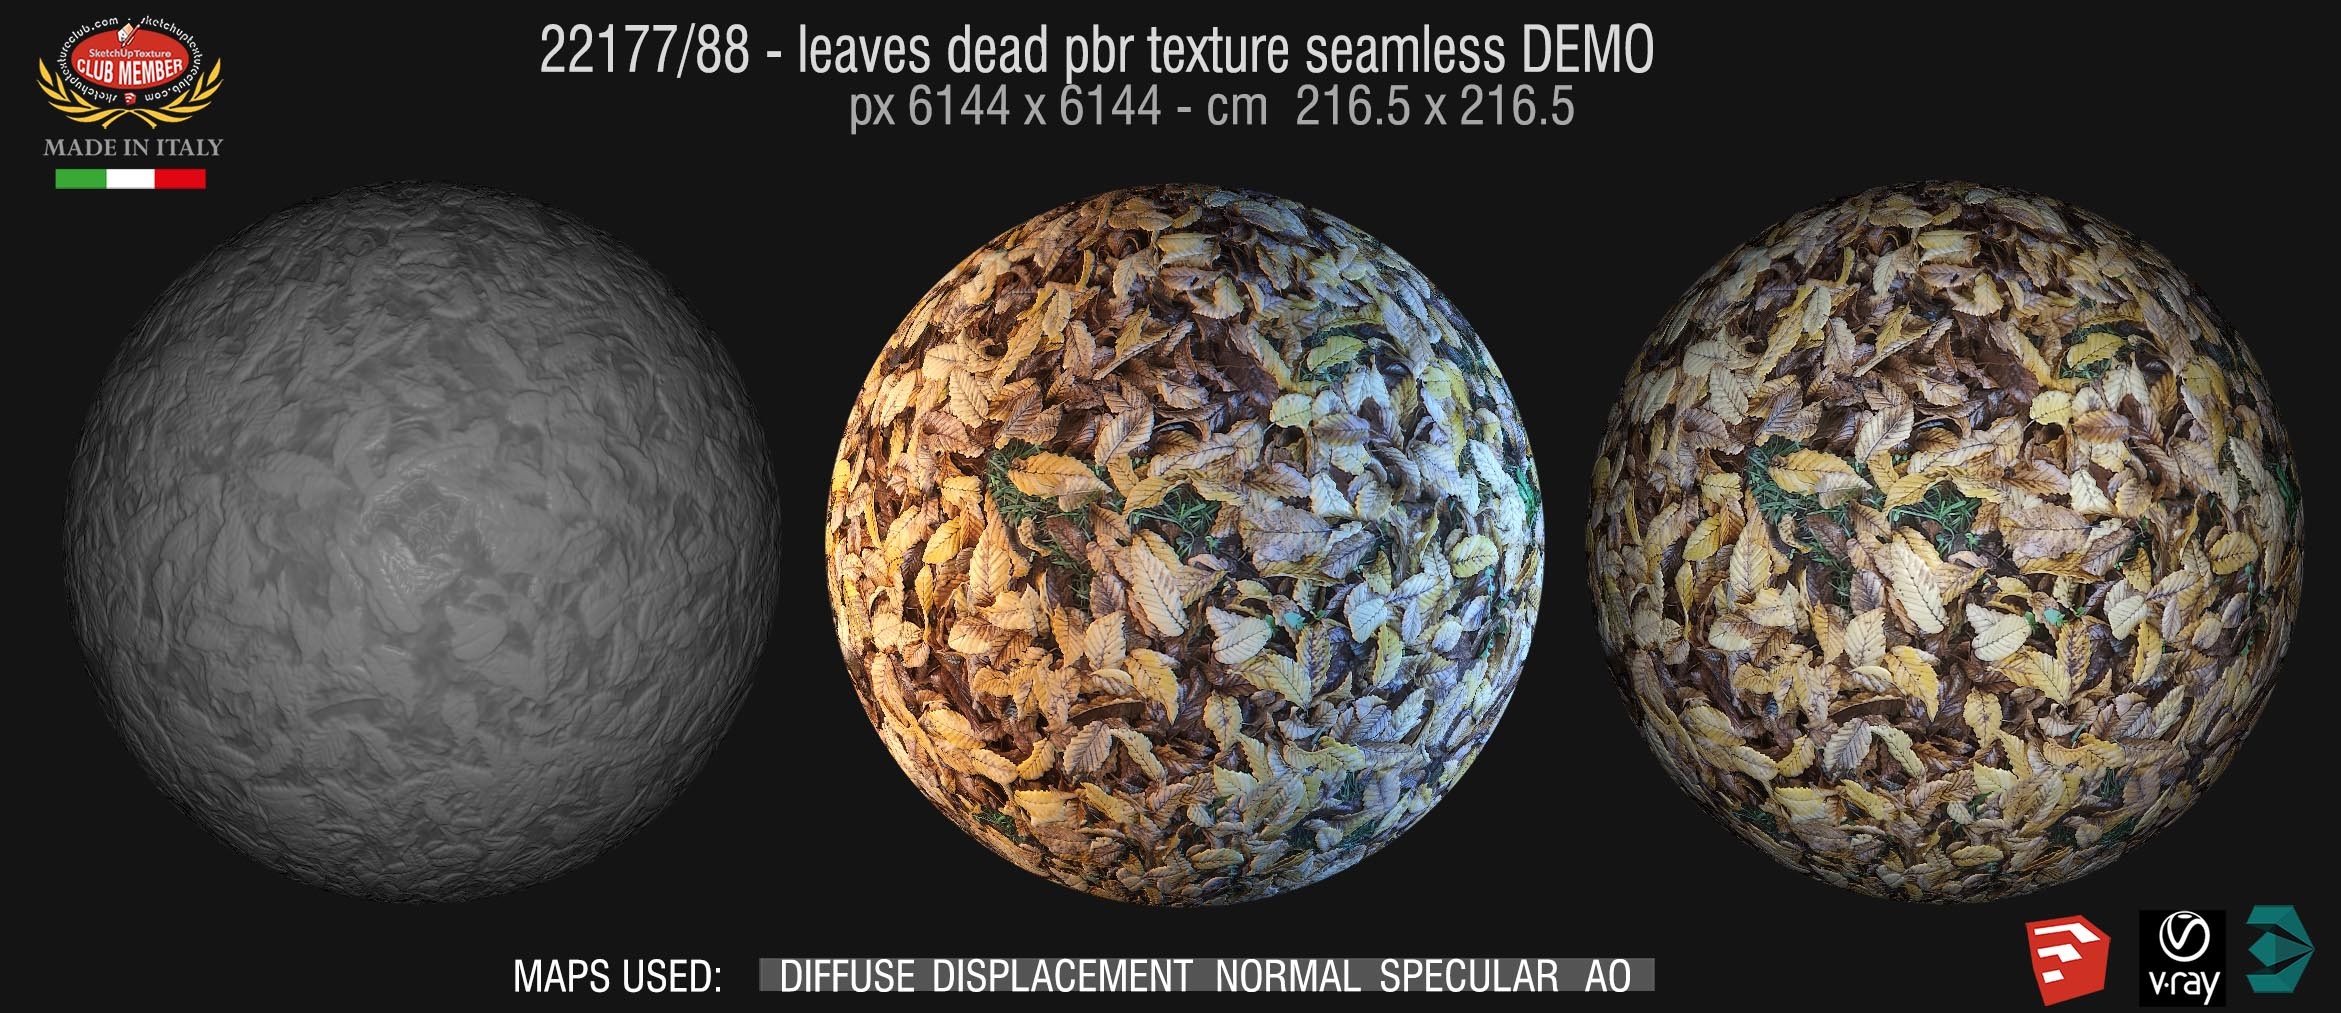 22177/88 leaves dead pbr texture seamless DEMO